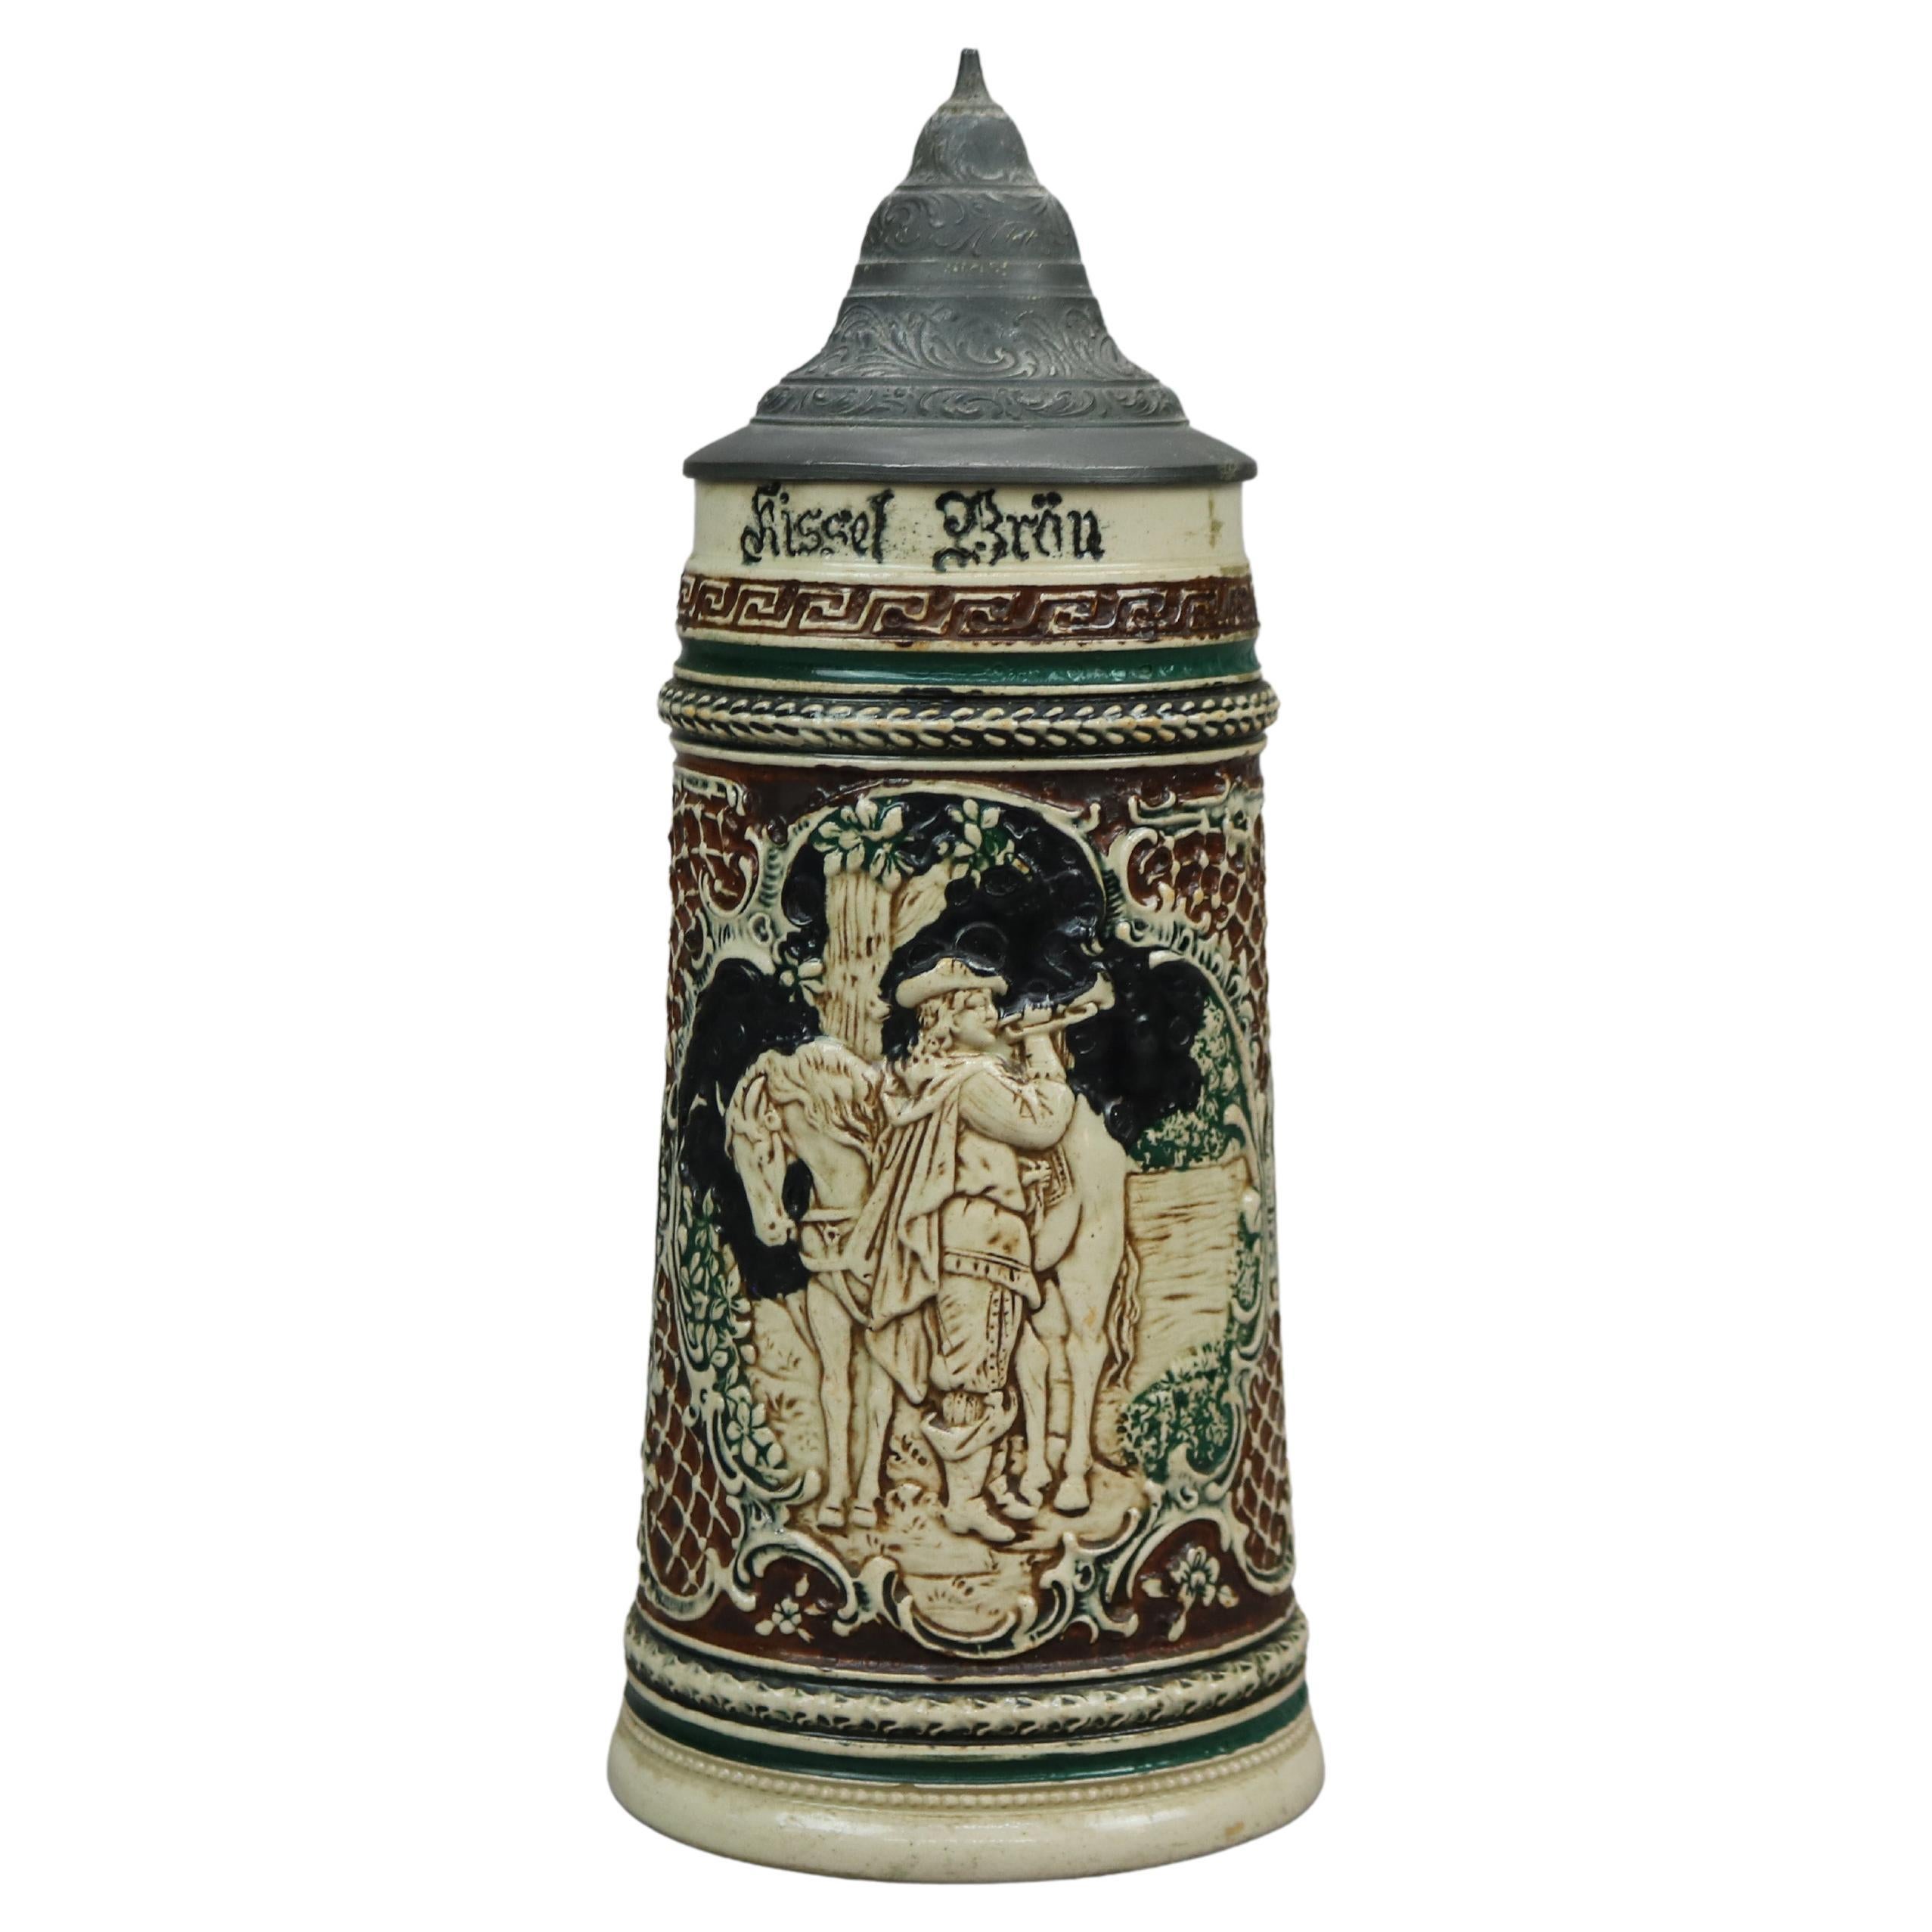 Antique Large German Stoneware Beer Stein, Scenic with Figures in Relief, c1900